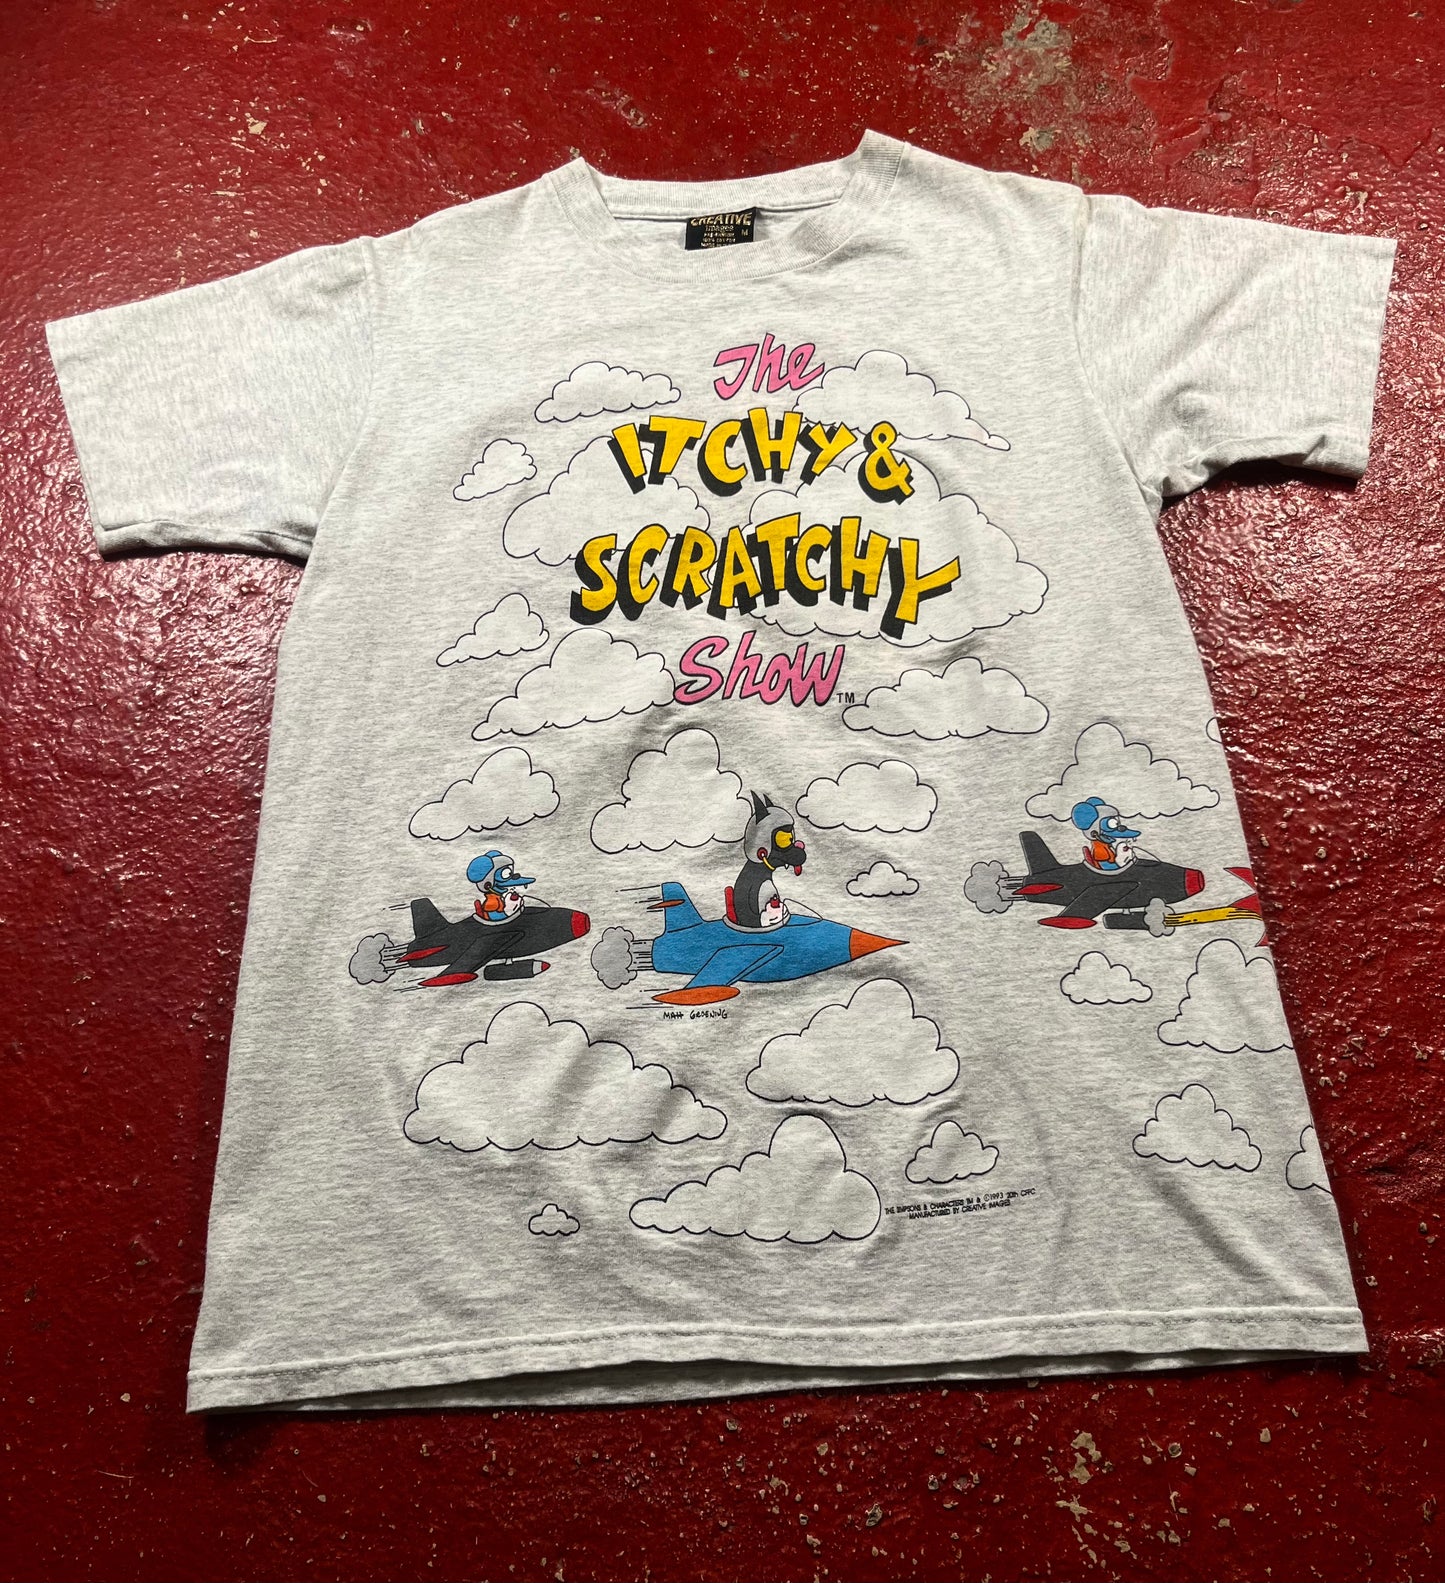 1993 Itchy & Scratchy Tee